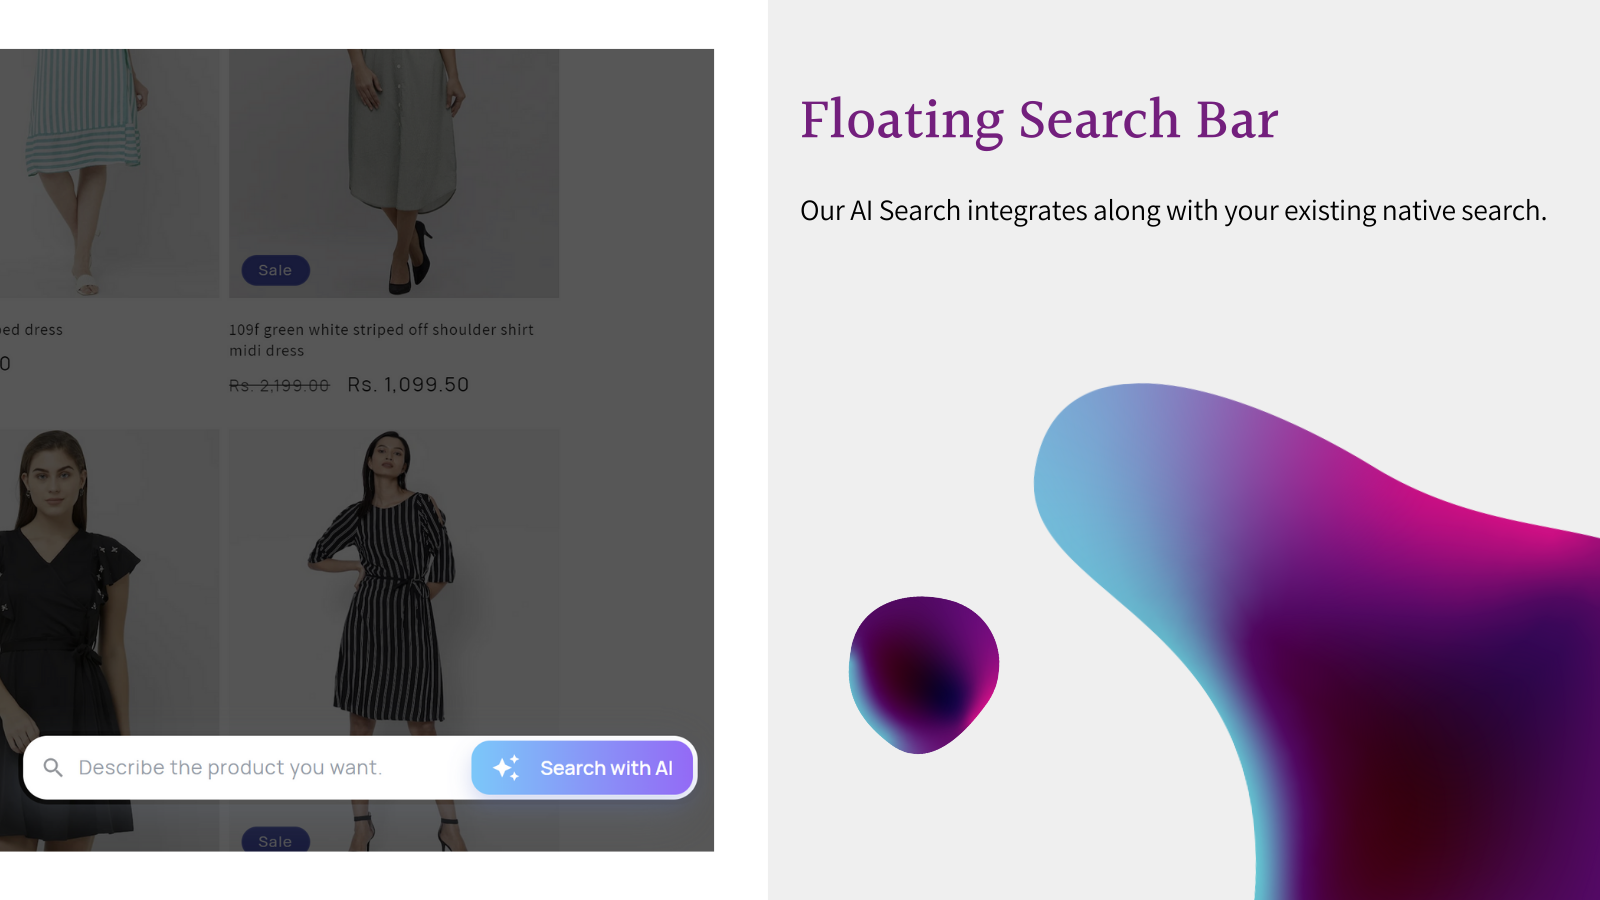 DeepSearch - Floating Search Bar